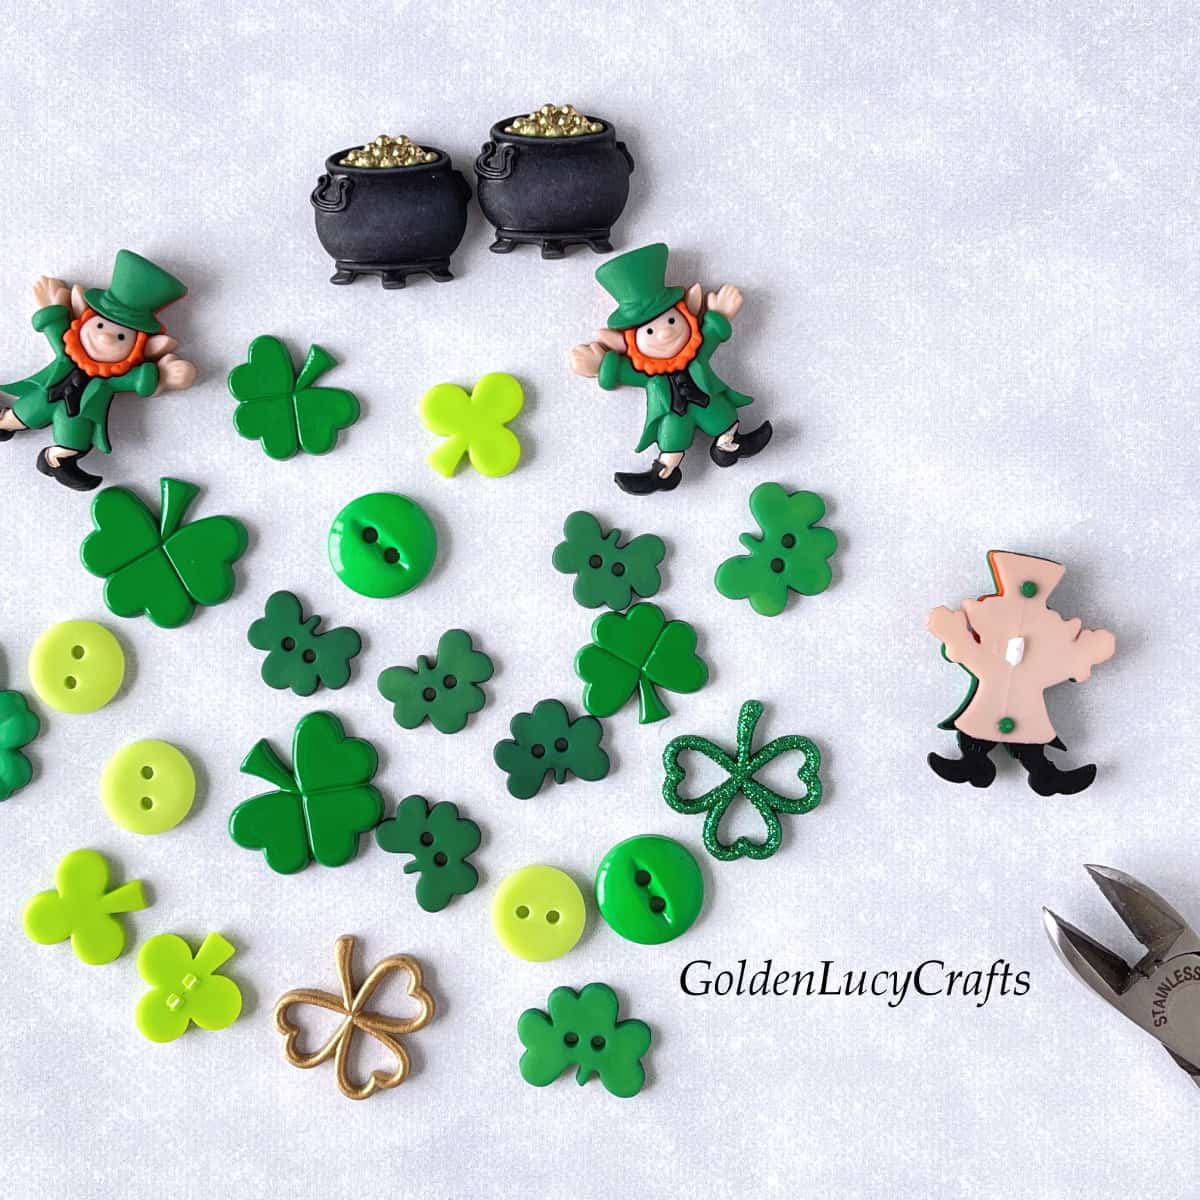 Craft buttons for St. Patrick's Day.